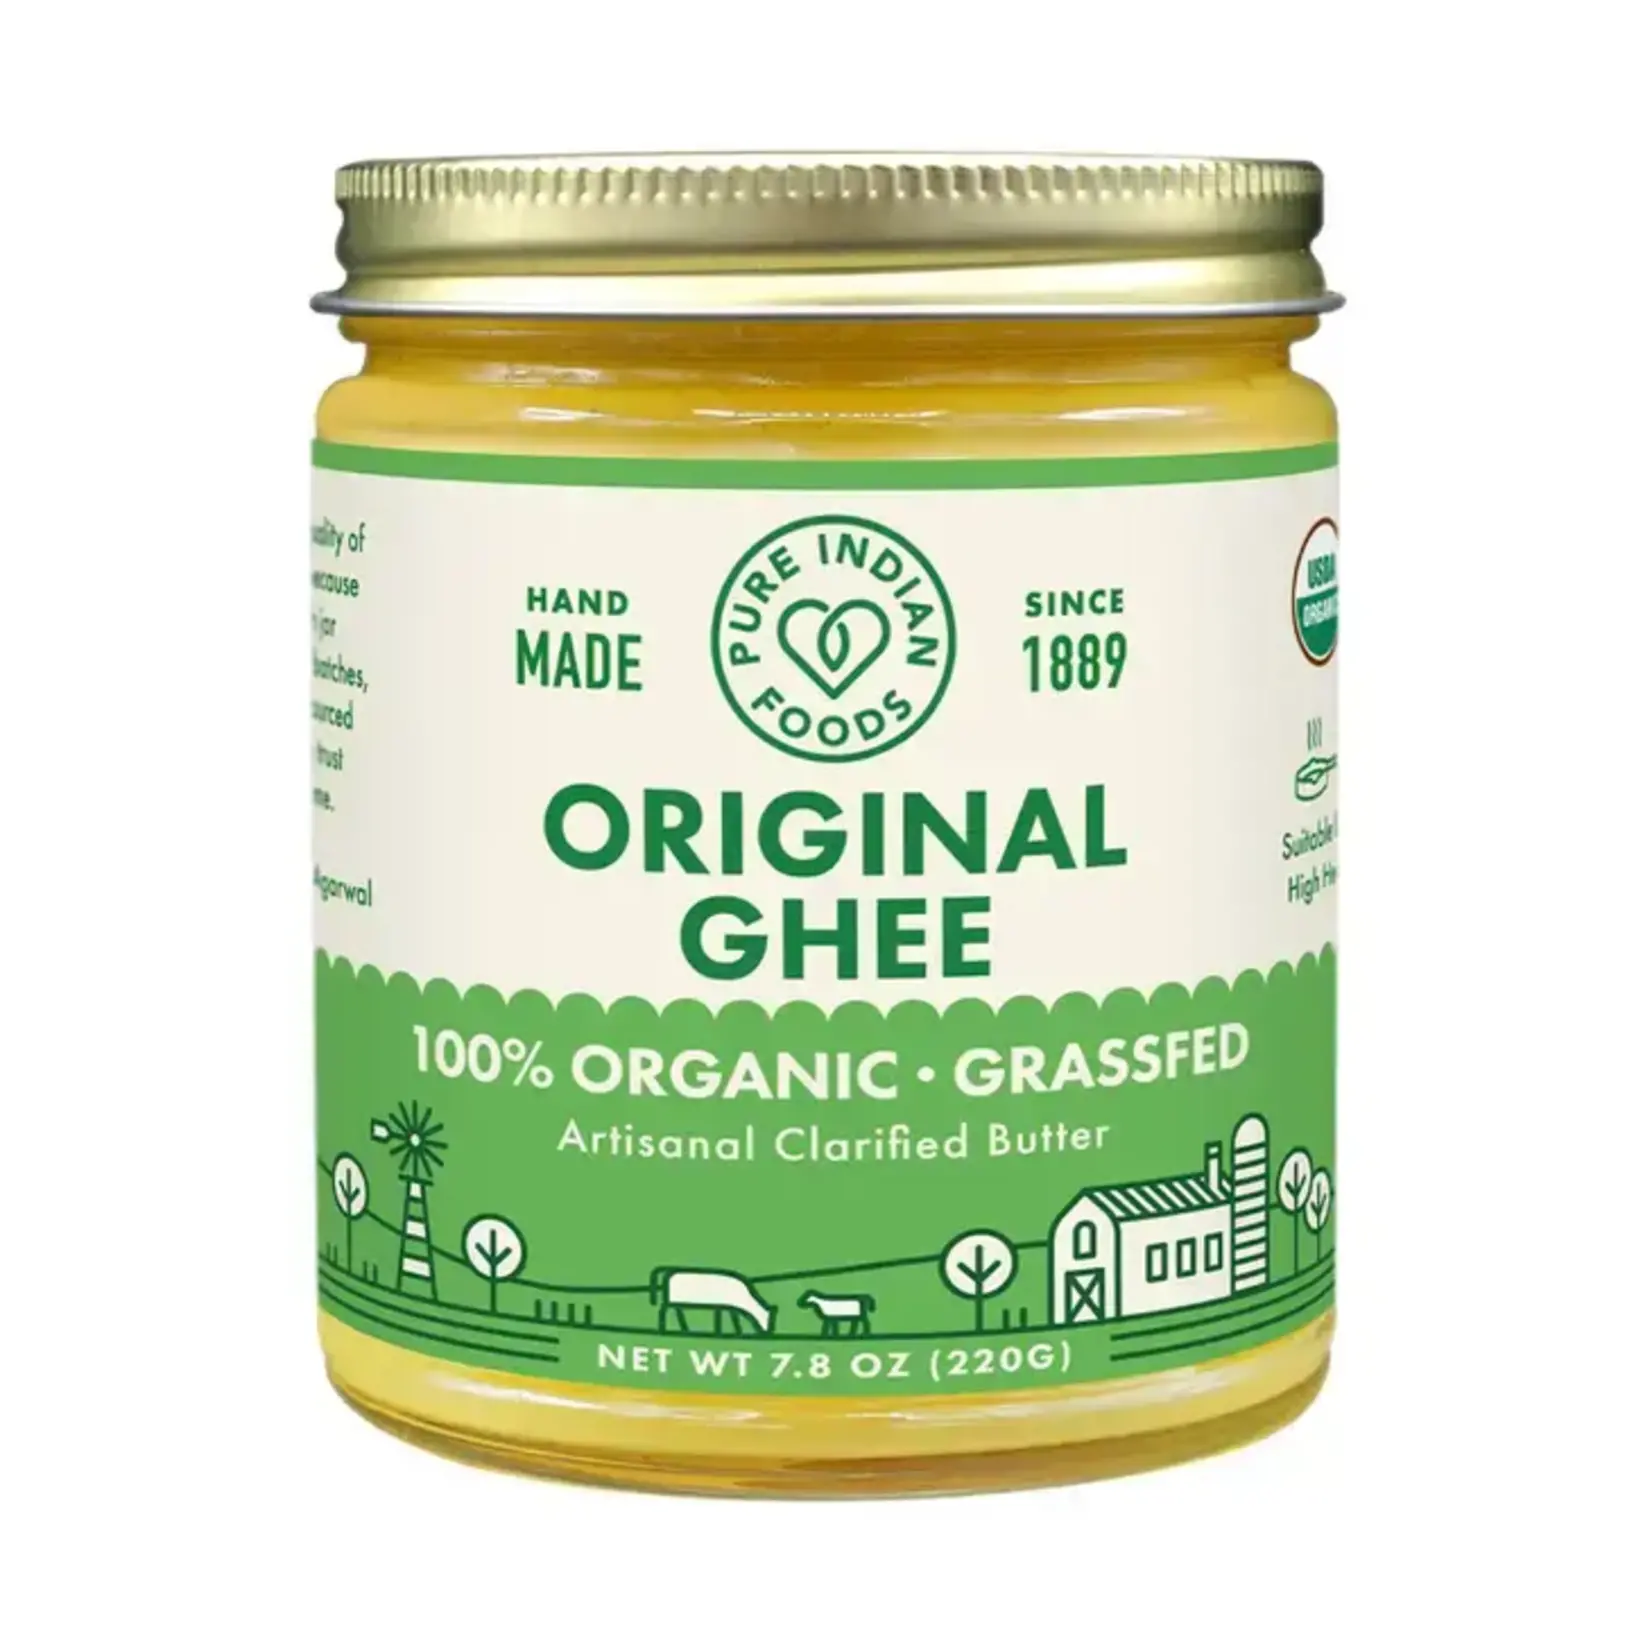 Pure Indian Foods Original Ghee, Grassfed and Certified Organic